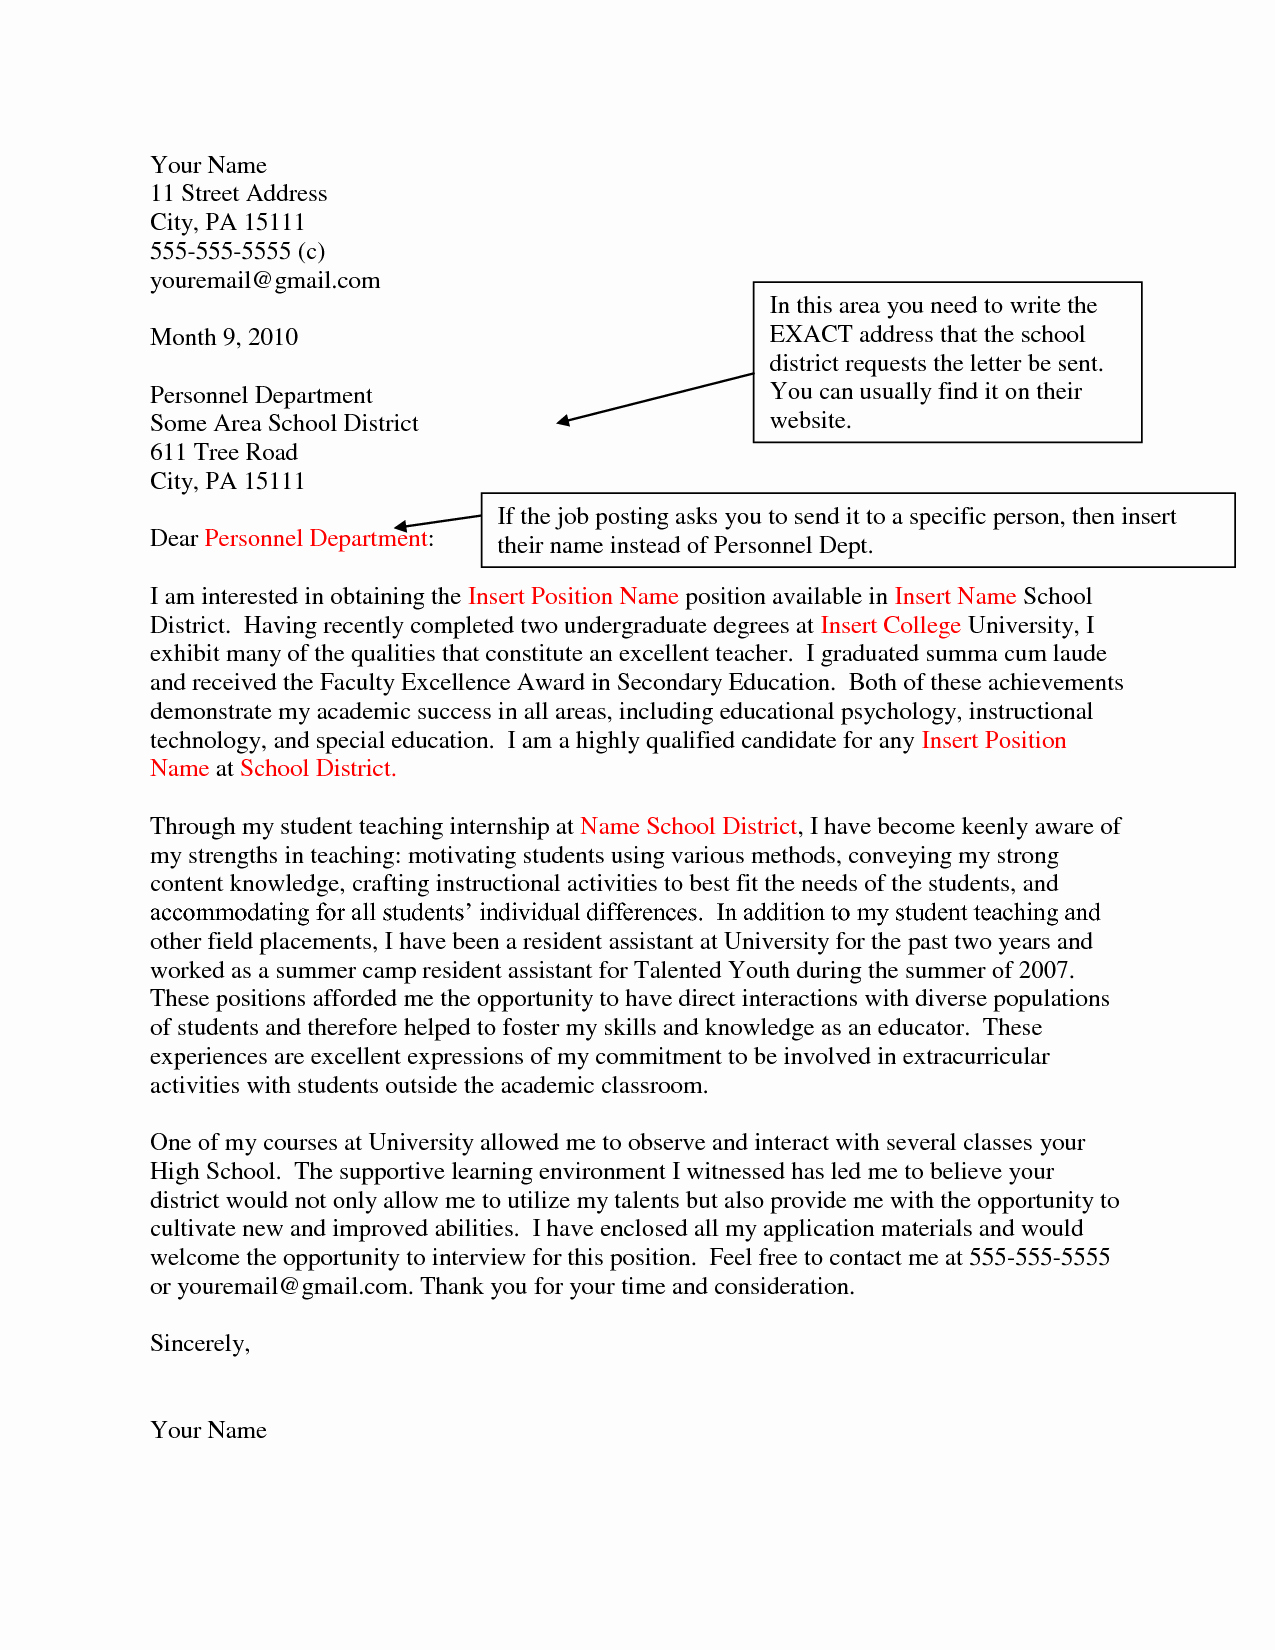 Letters Of Interest Education Awesome How to Write A Cover Letter Of Interest Example for A Job